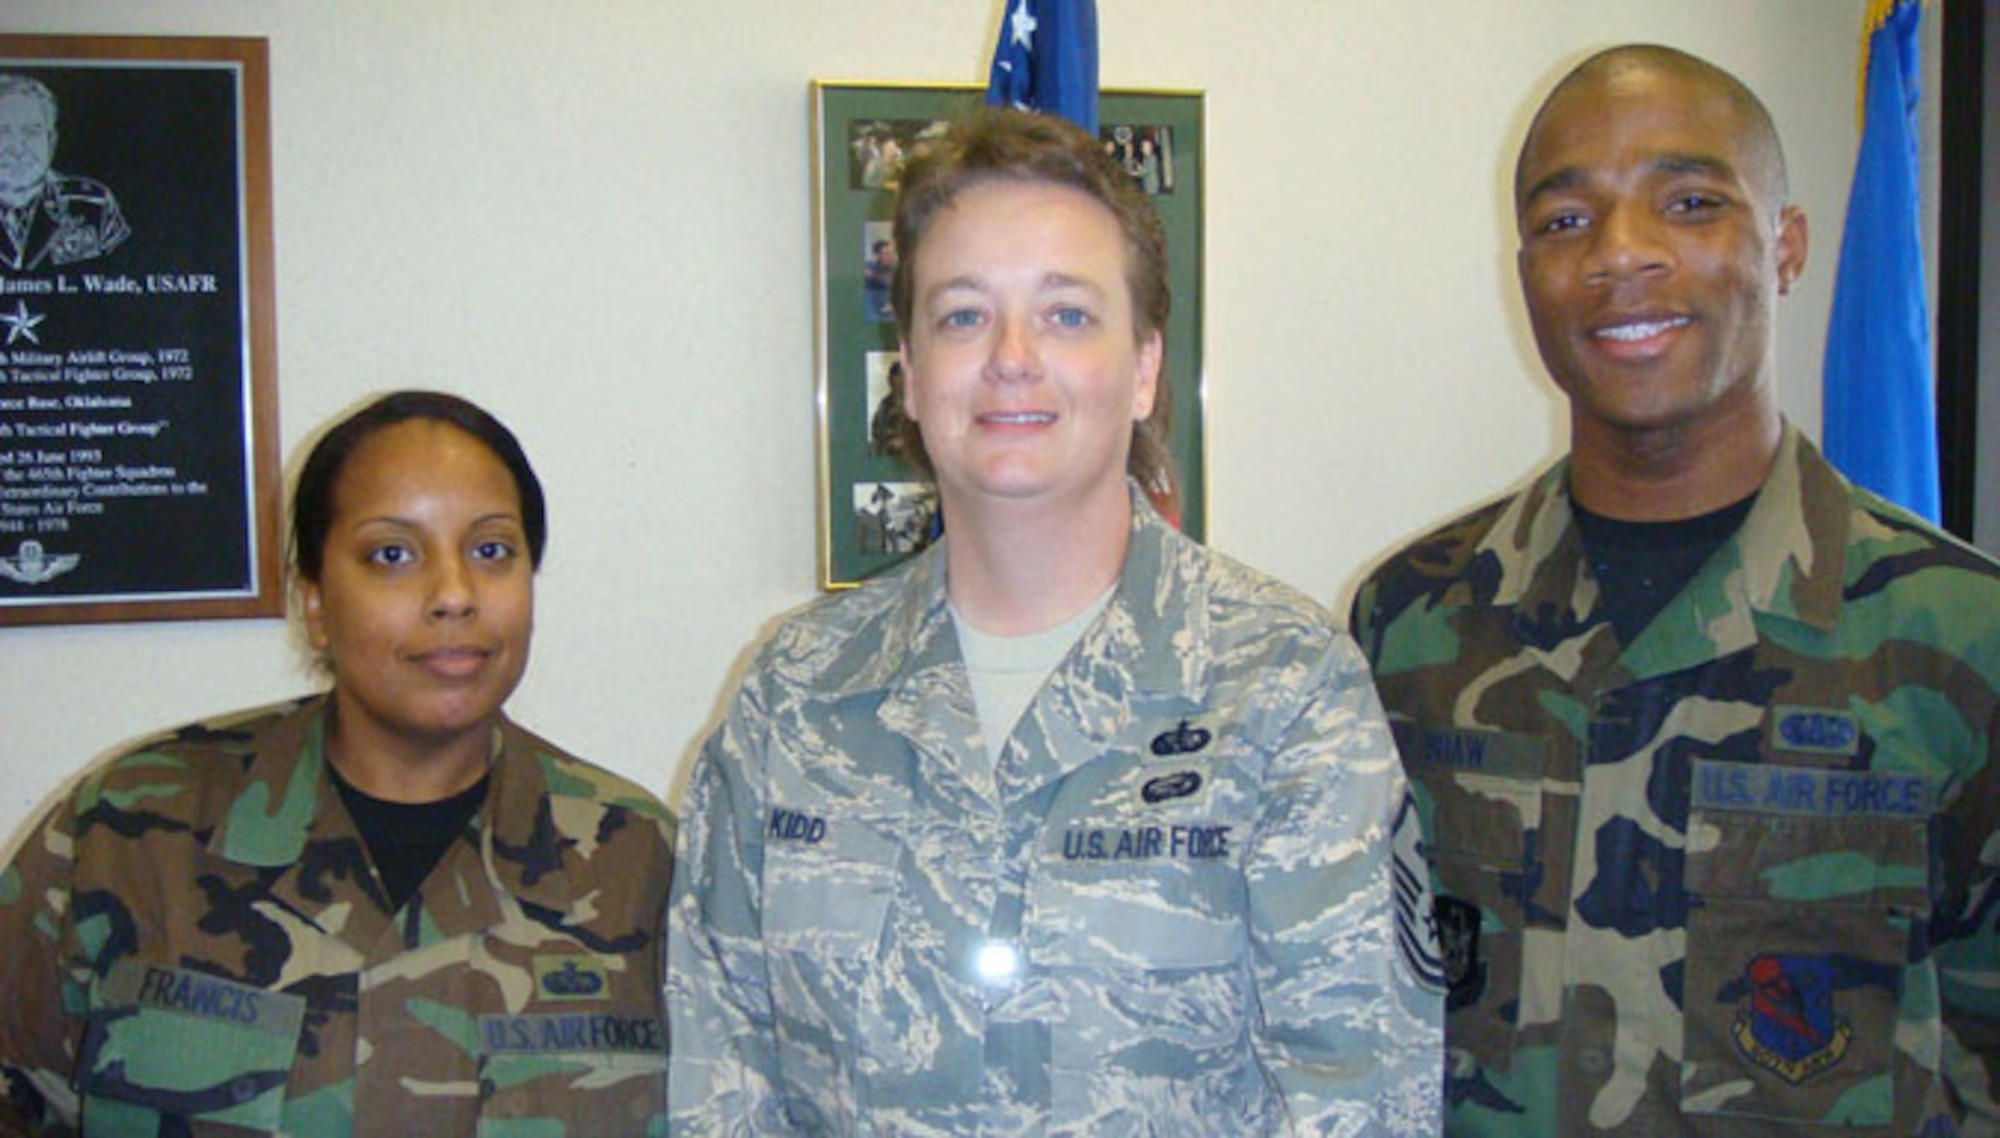 507th Air Refueling Wing reservists Tech. Sgt Tyesha Francis, Master Sgt. Deborah Kidd and Airman Richard Shaw were selected winners of Air Force Material Command's Services Awards for 2007.